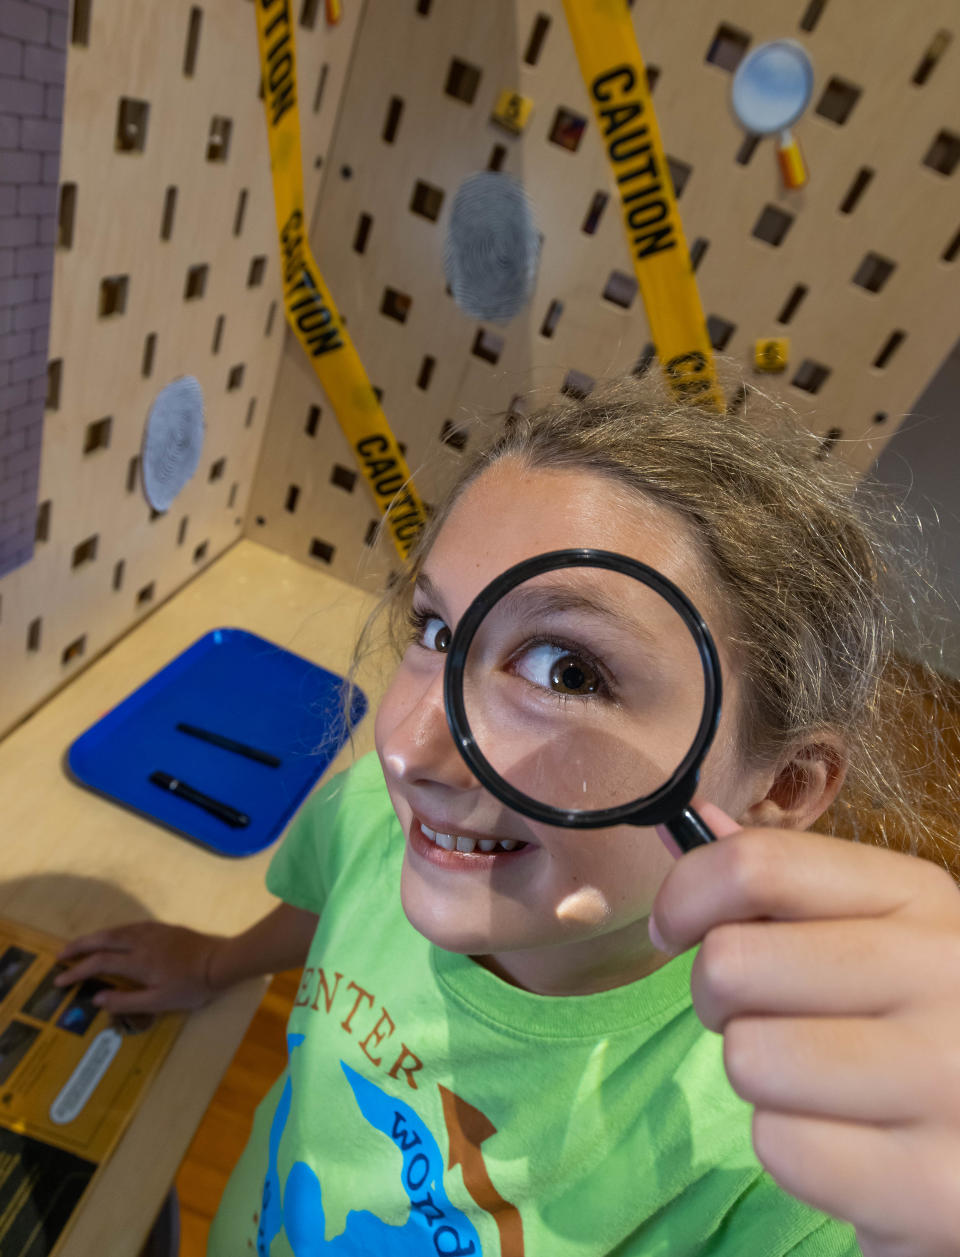 The "Spy Science" exhibit is up through Sept. 17 at the Discovery Center in Ocala.